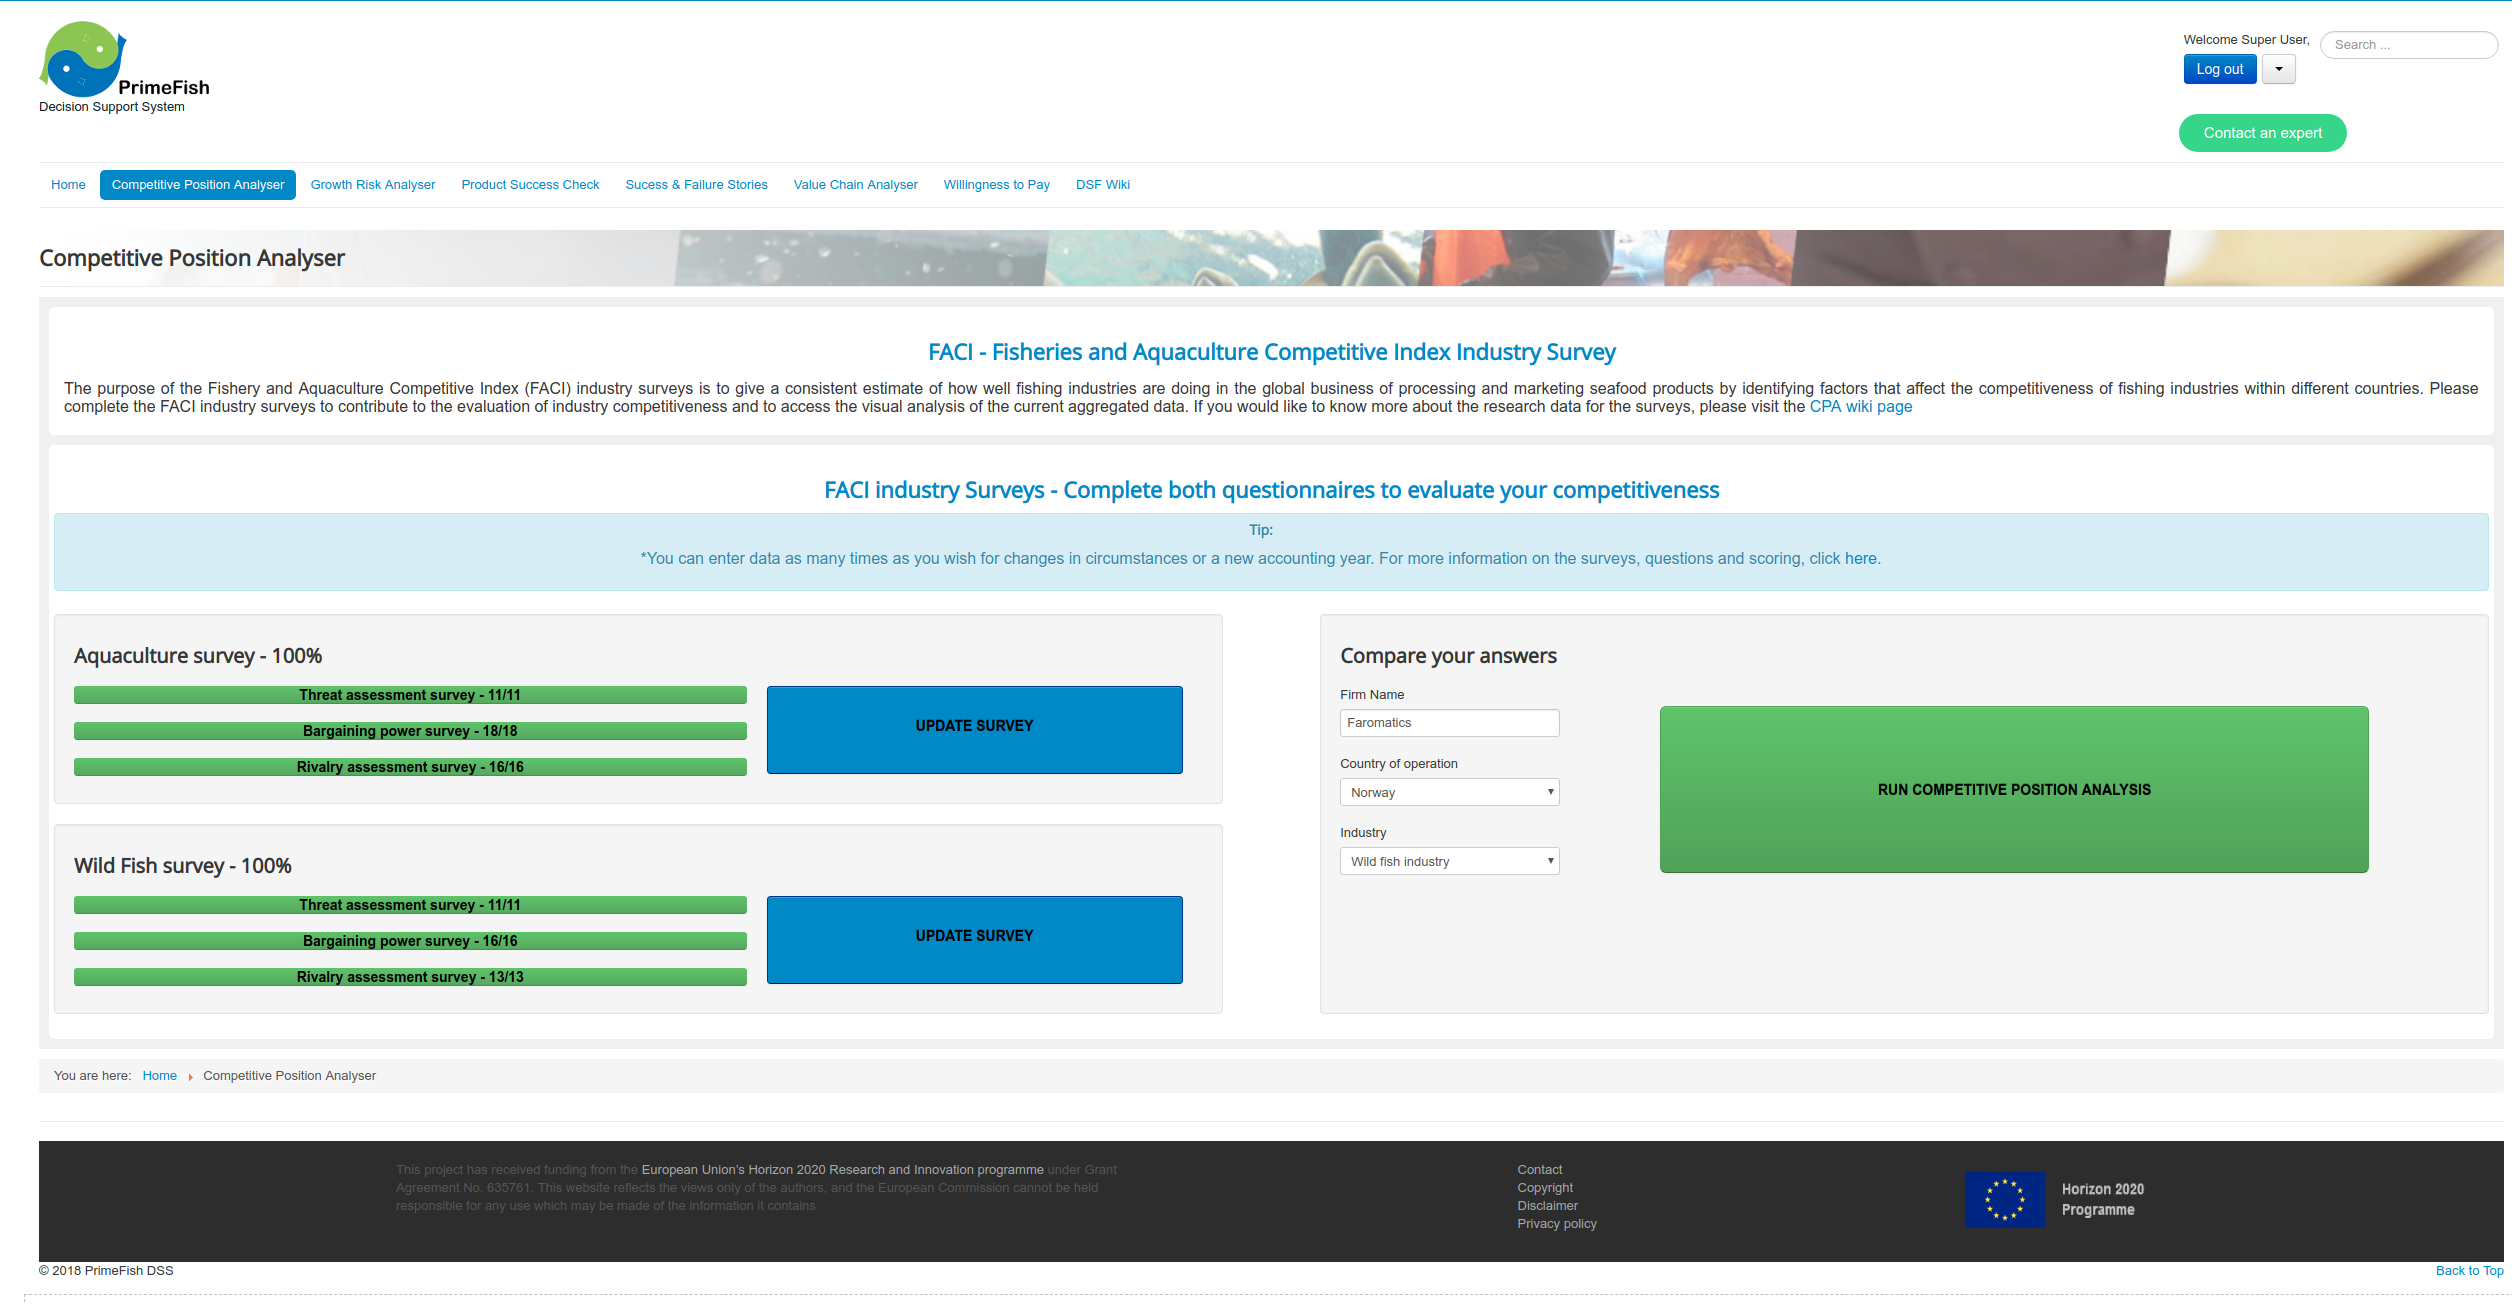 The CPA tool landing page.